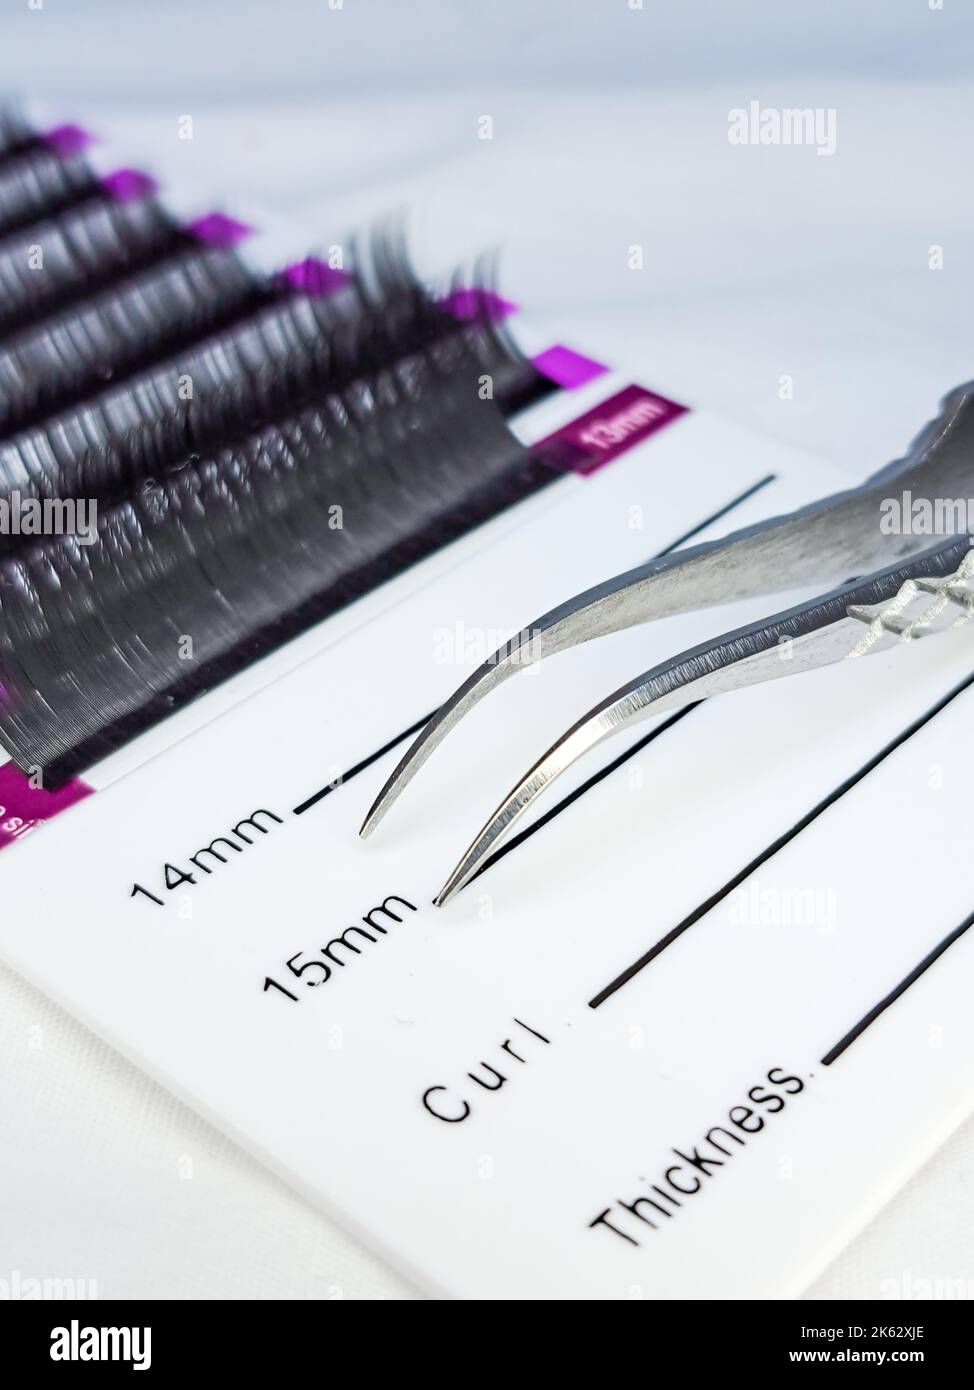 Equipment for eyelash extensions in beauty salon face care Stock Photo